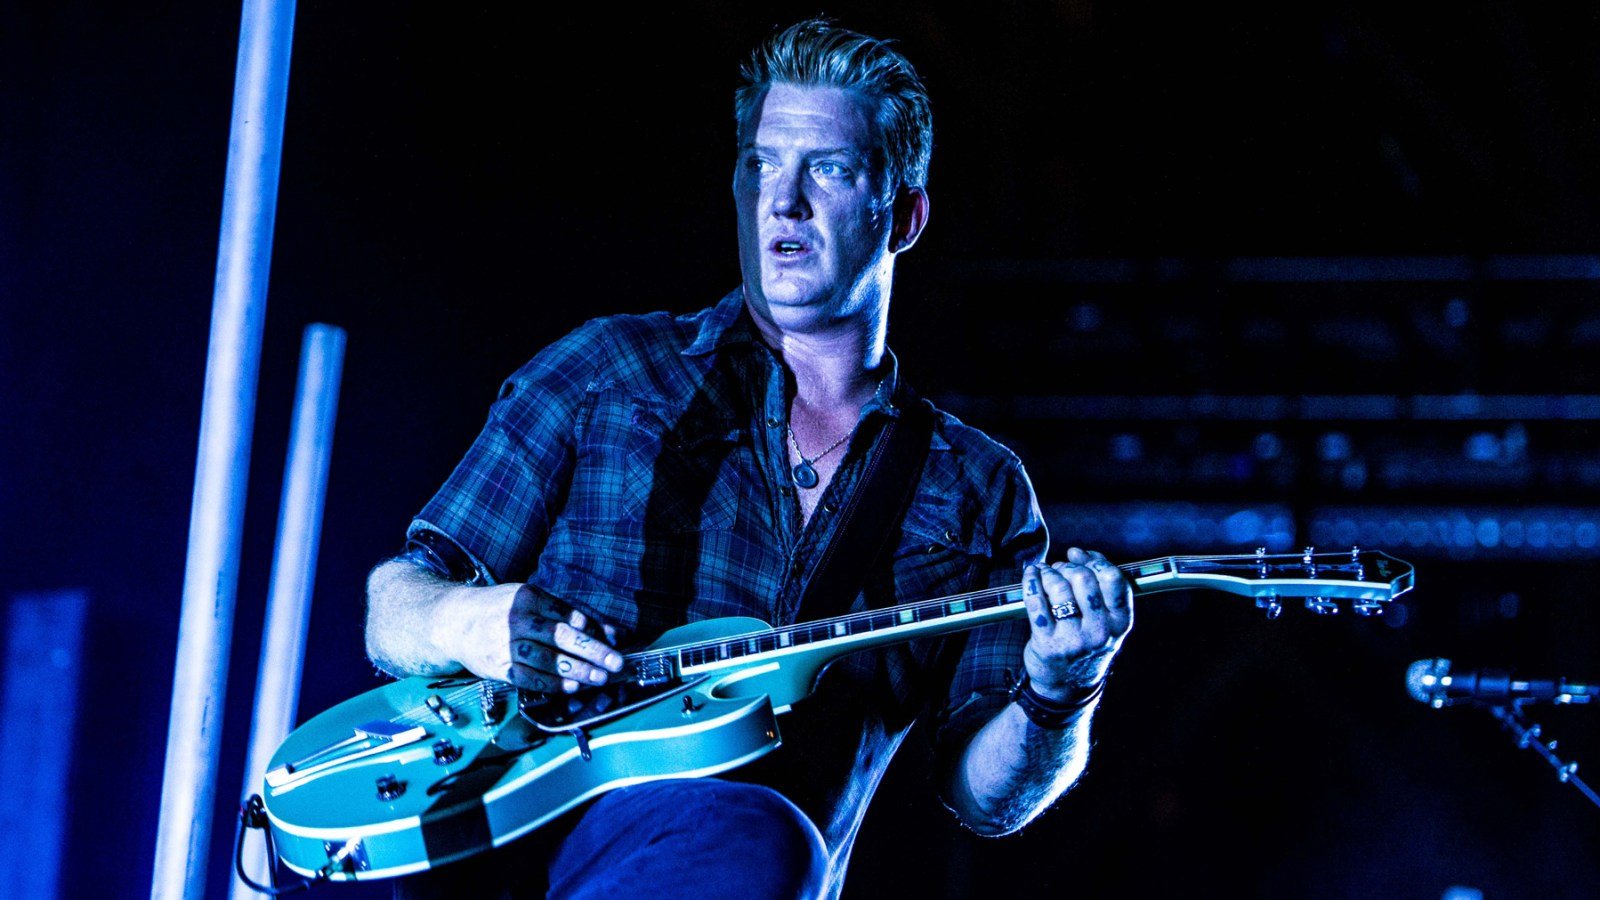 Queens of the Stone Age Cancel European Gigs as Josh Homme Recovers From Surgery